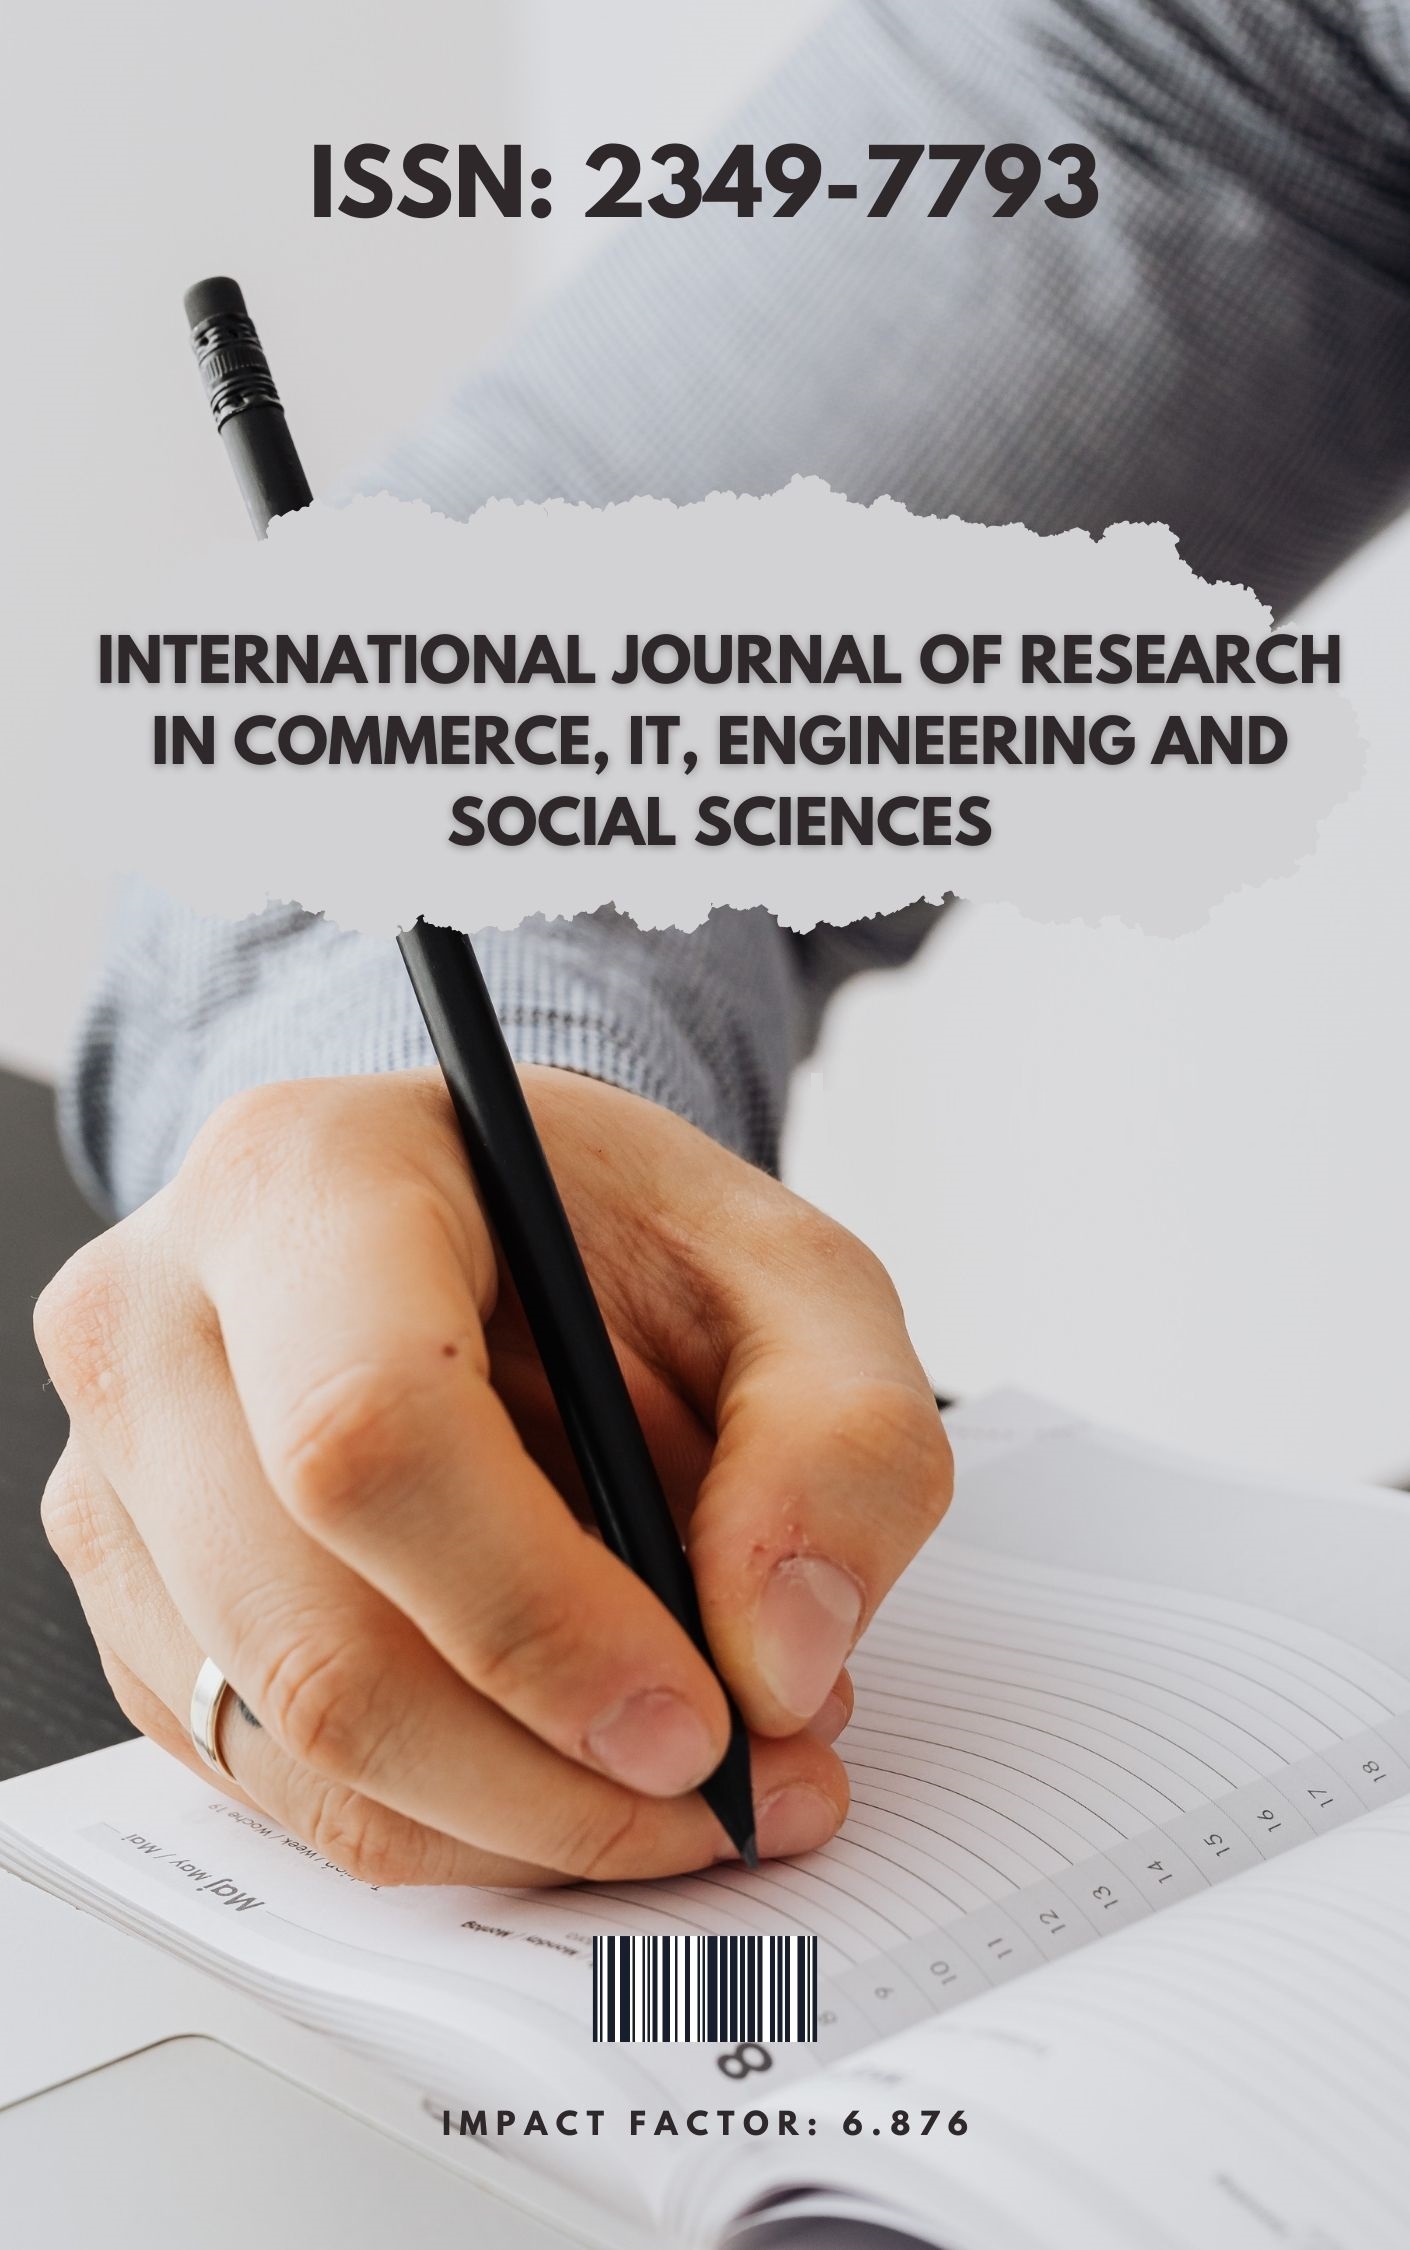 					View Vol. 15 No. 9 (2021): International Journal of Research in Commerce, IT, Engineering, and Social Sciences
				